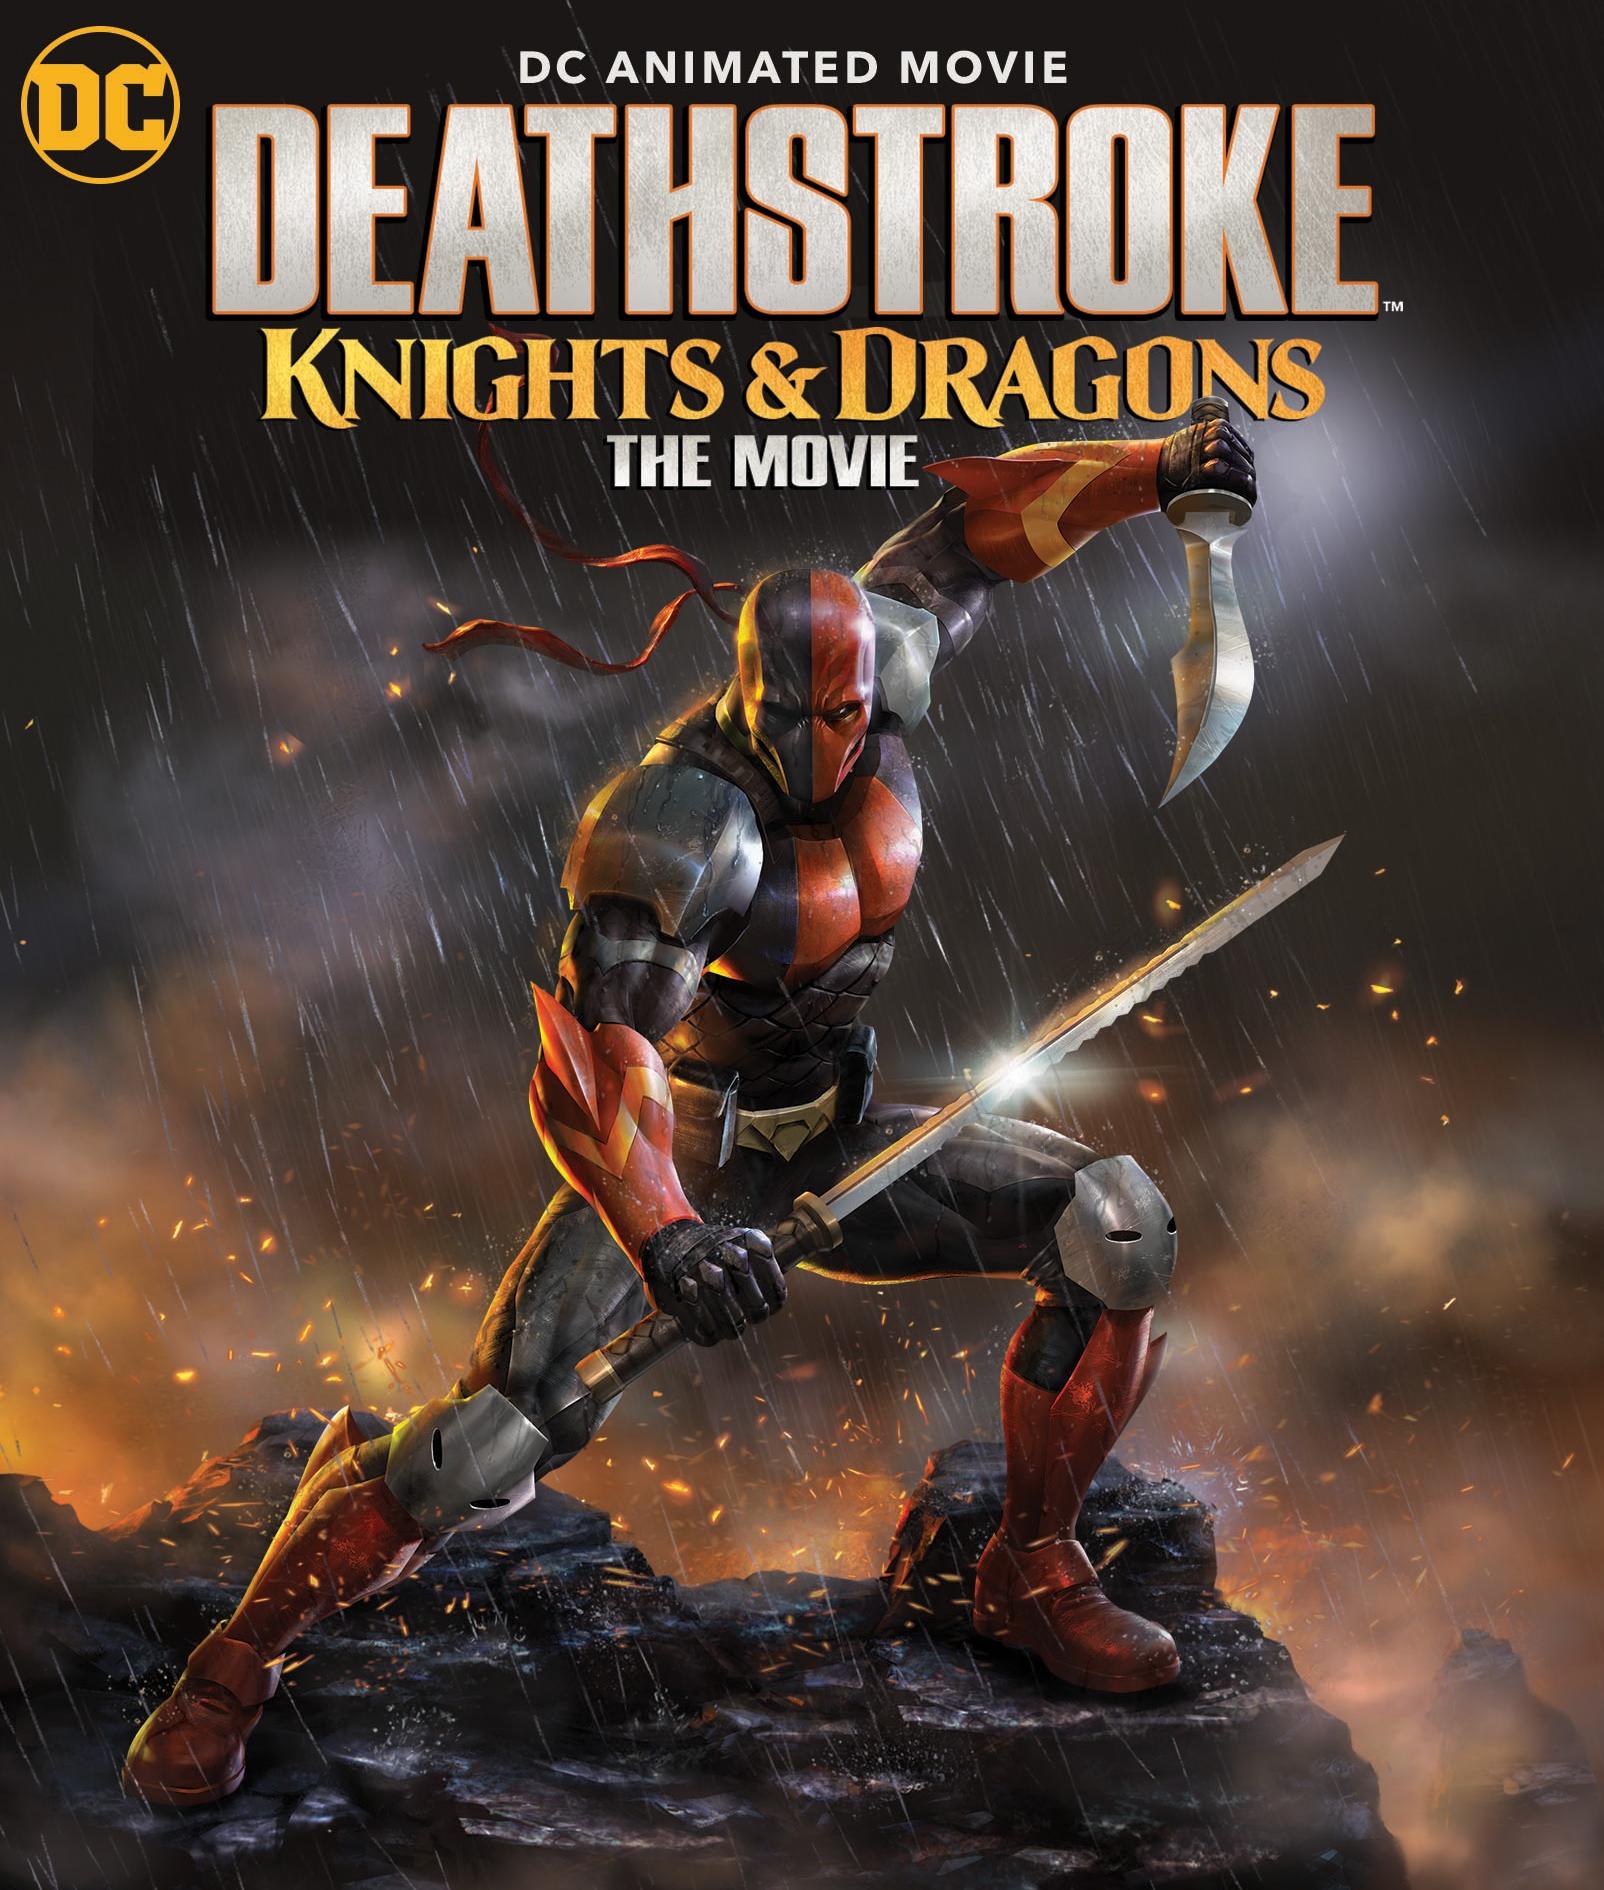 Deathstroke Knights & Dragons: The Movie (2020) Michael Chiklis